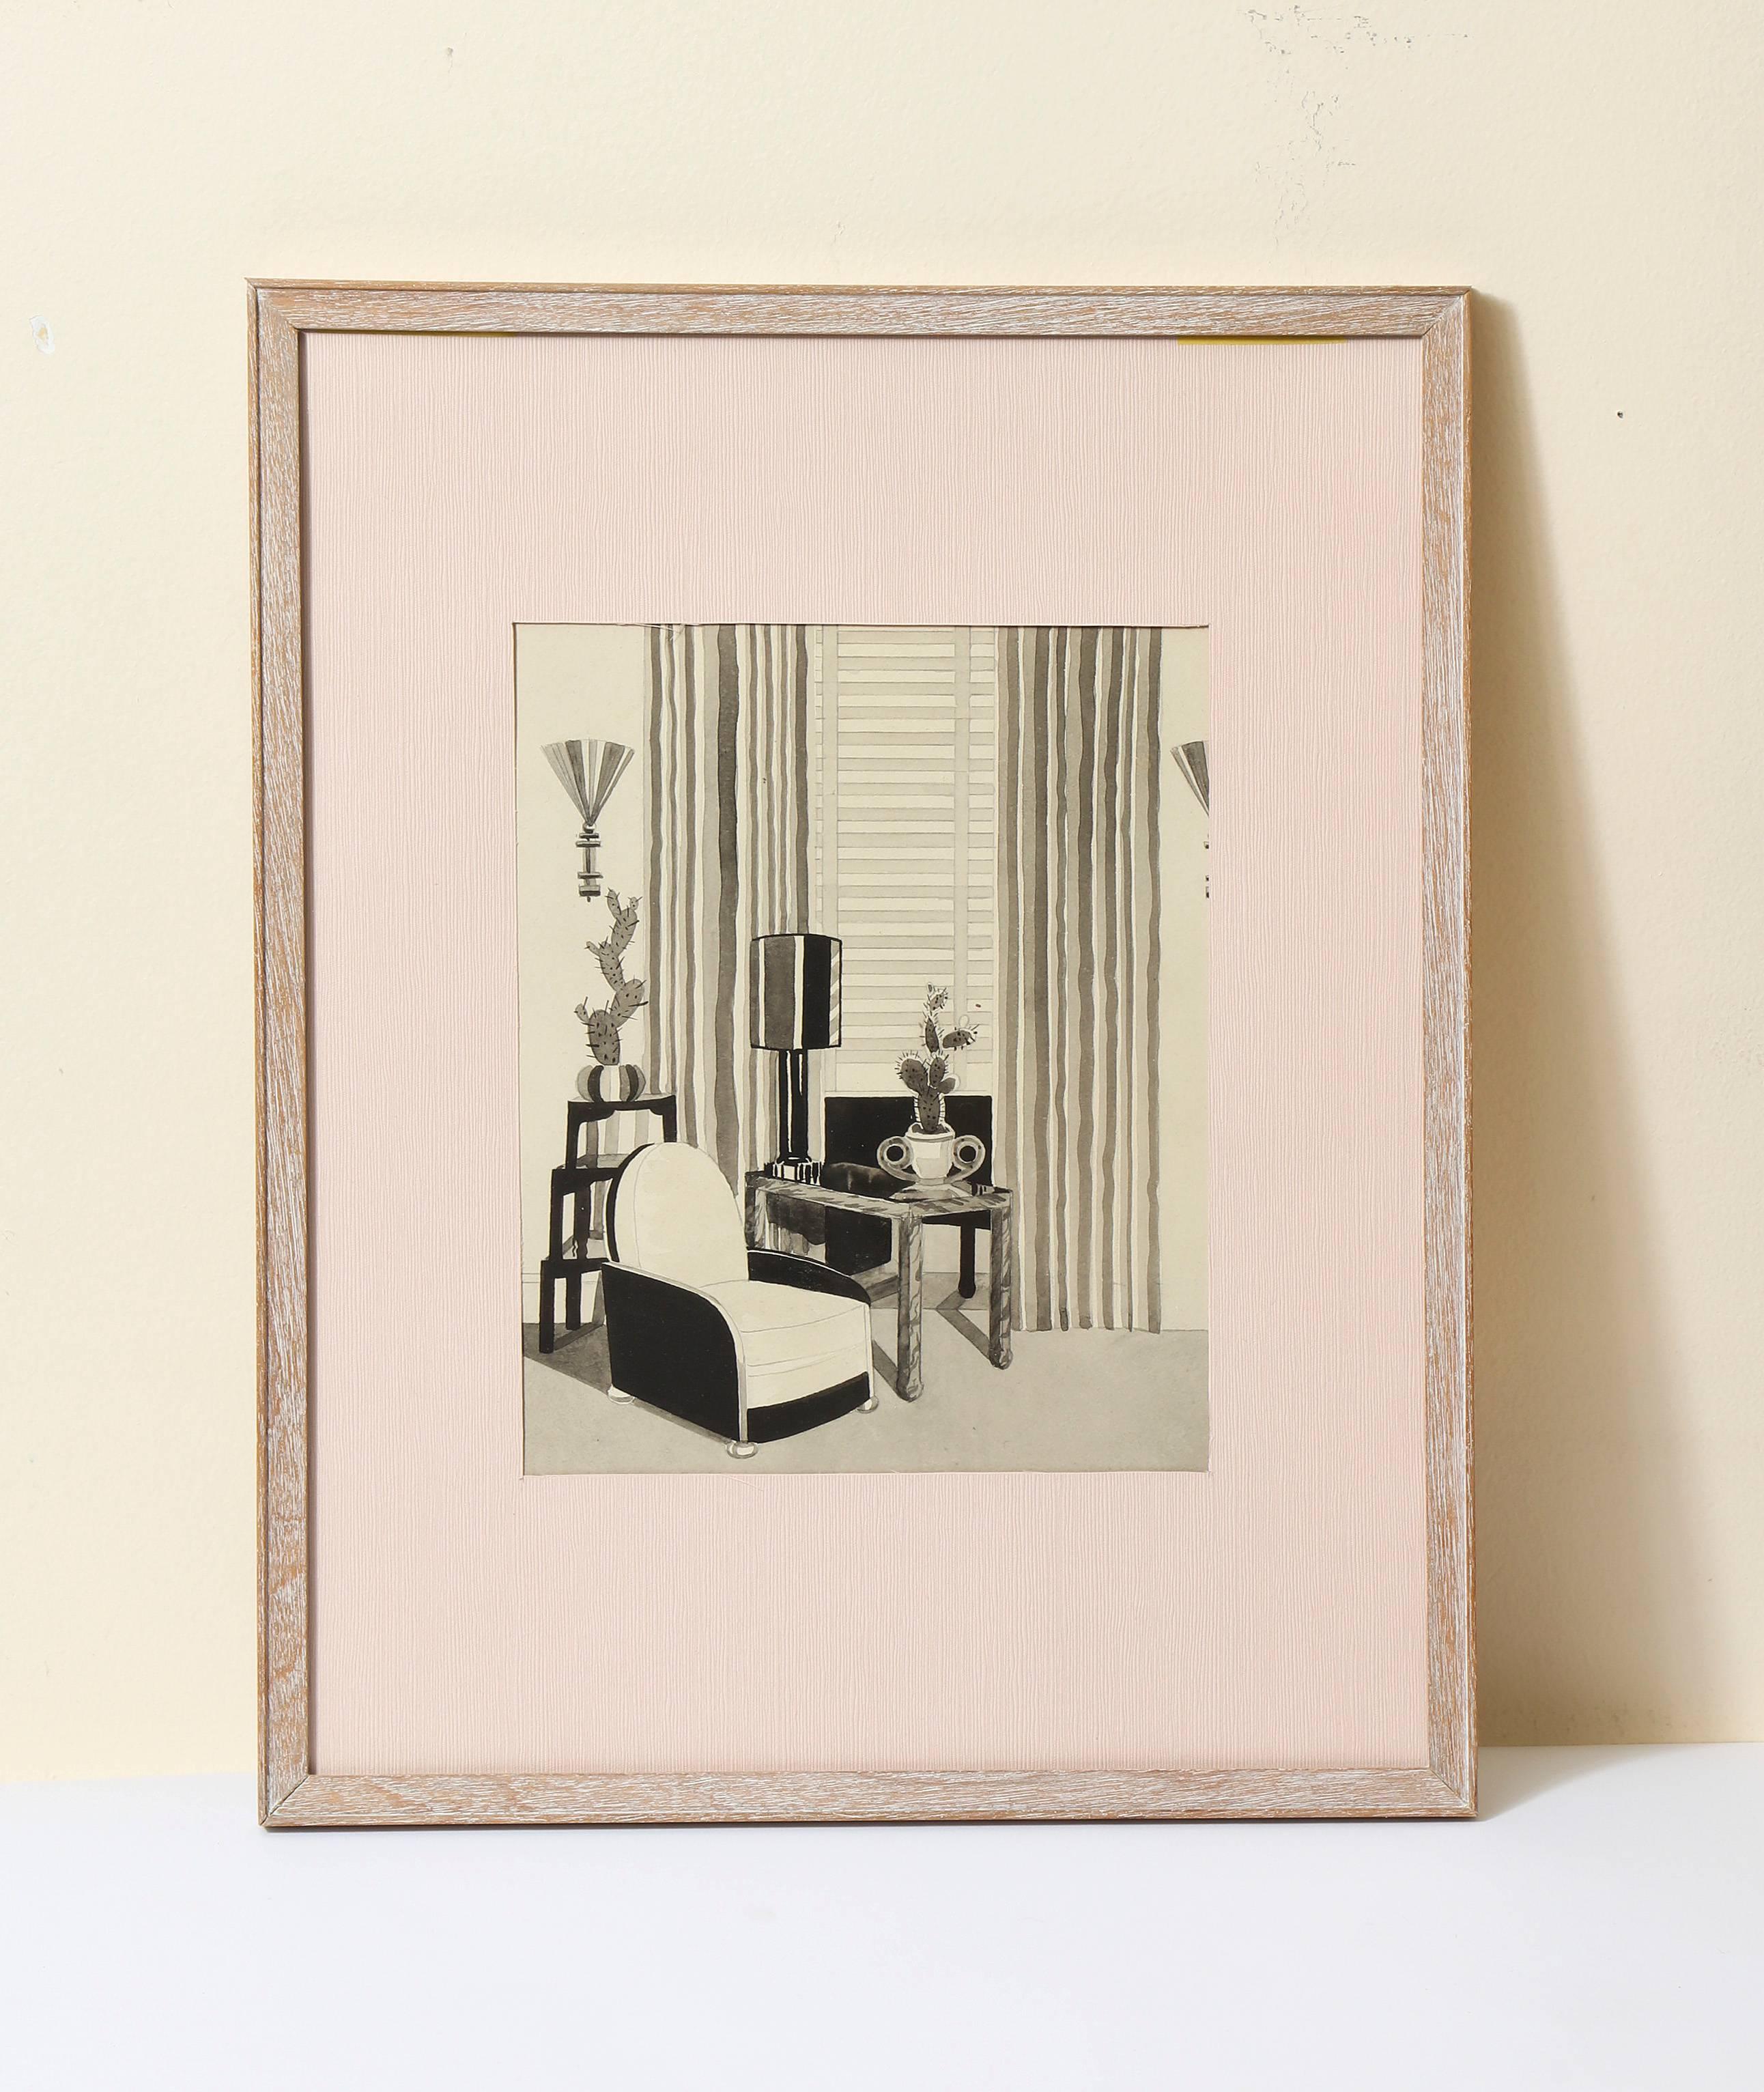 An Art Deco modernist interior architectural drawing, with a period frame of “céruse” finish over maple. 

Size framed: 15